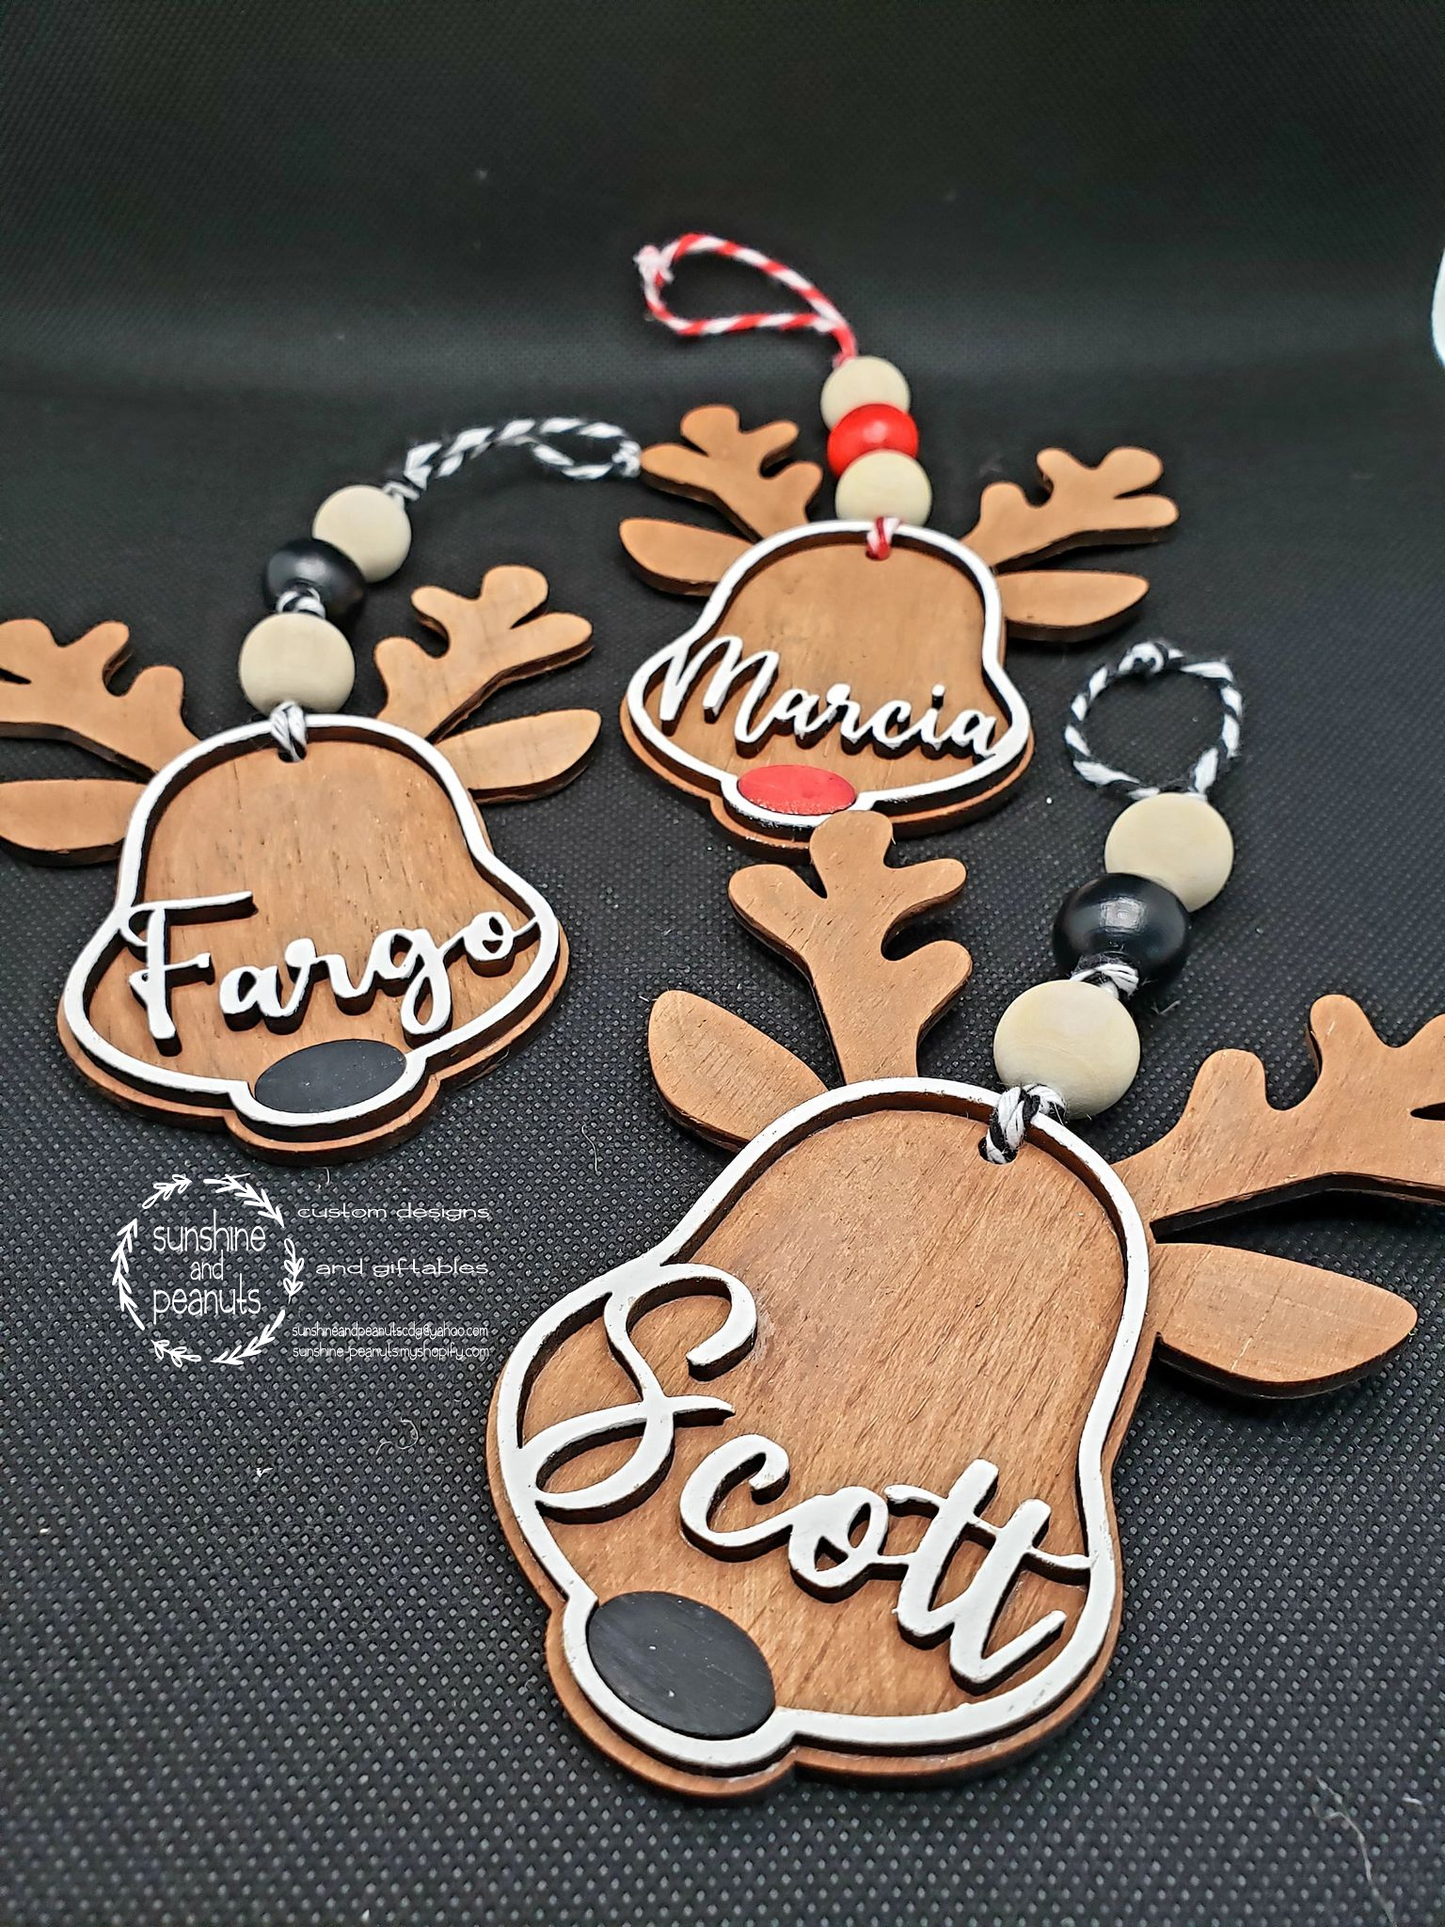 This personalized reindeer ornament is the perfect addition to your holiday décor. Laser cut from Birch wood, it is stained with a unique combination of cherry and maple wood, with hand-painted accents. Measuring 4" wide and 5" tall, it comes with a choice of either a Black or Red nose and can be personalized with your name. Each ornament is made to order and will ship within 5-7 days.